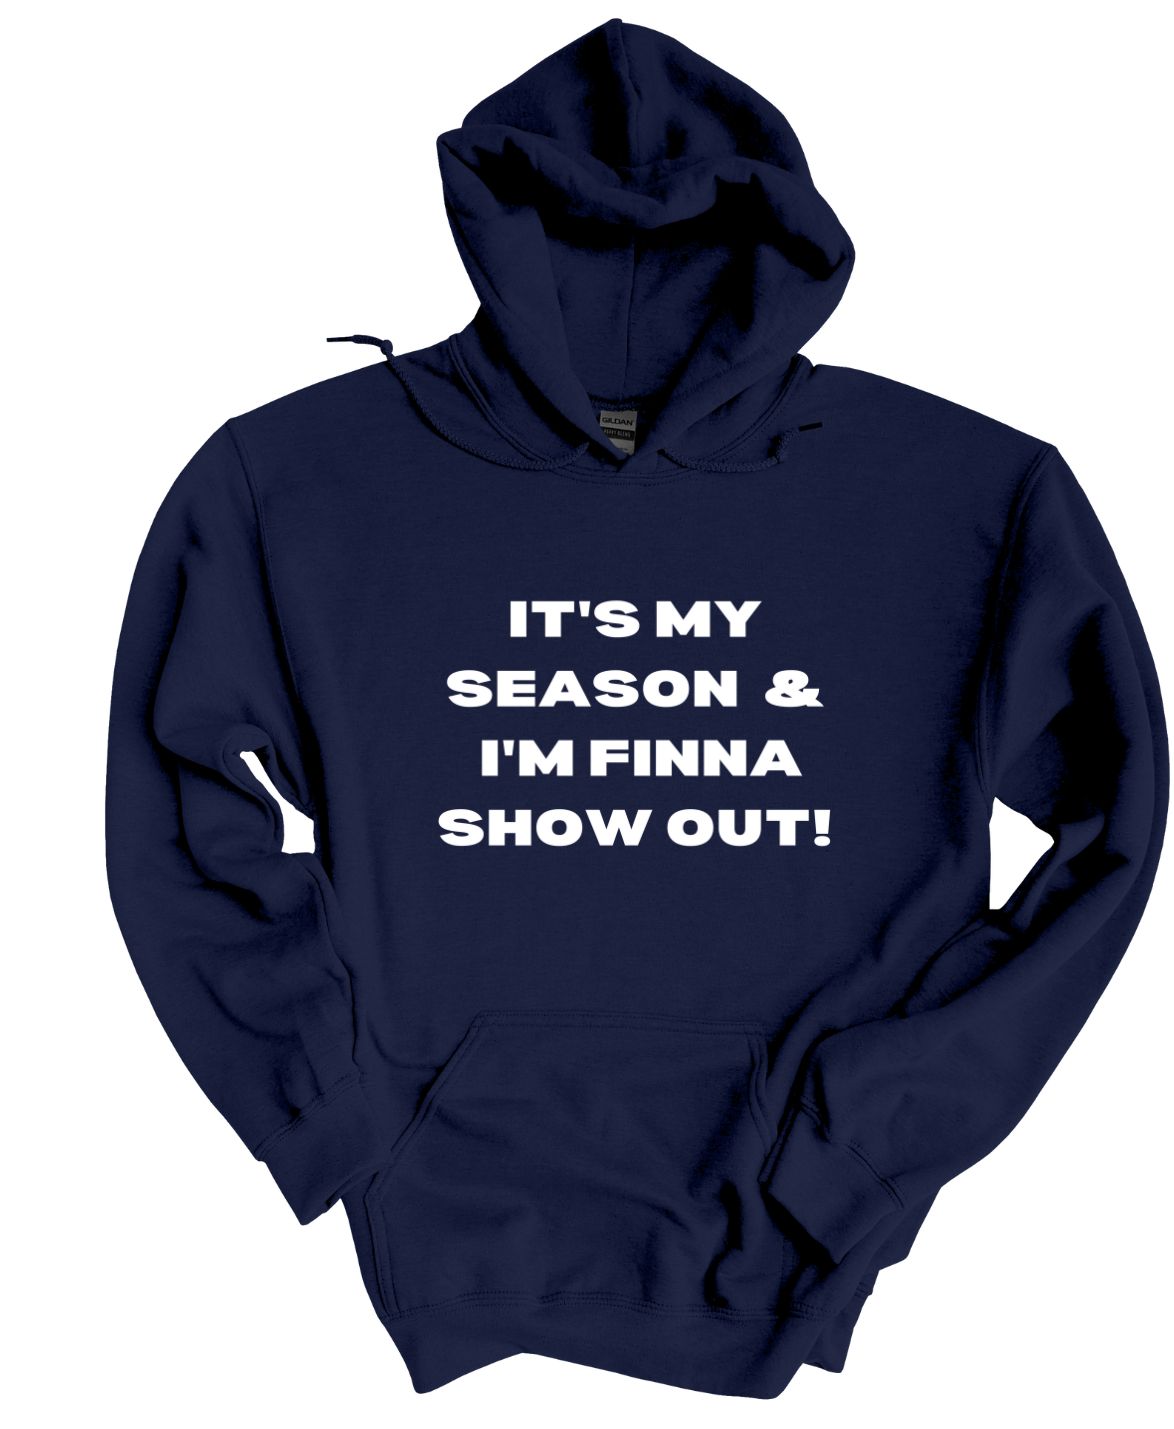 It's My Season and I'm Finna Show Out  Hoodies